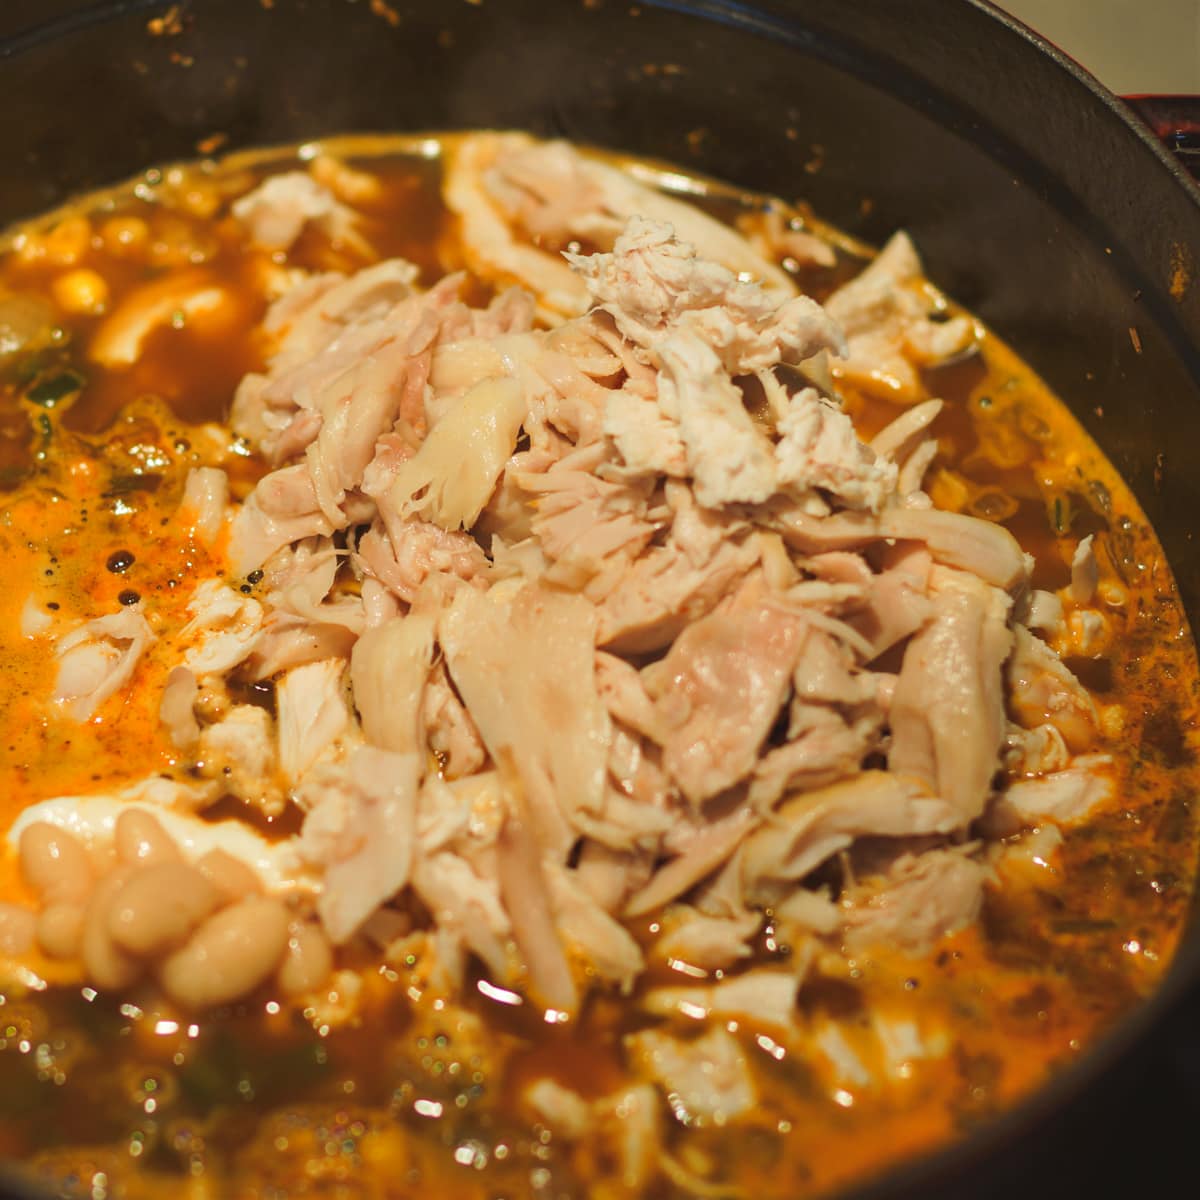 Smoked chicken added to a pot of white chicken chili.